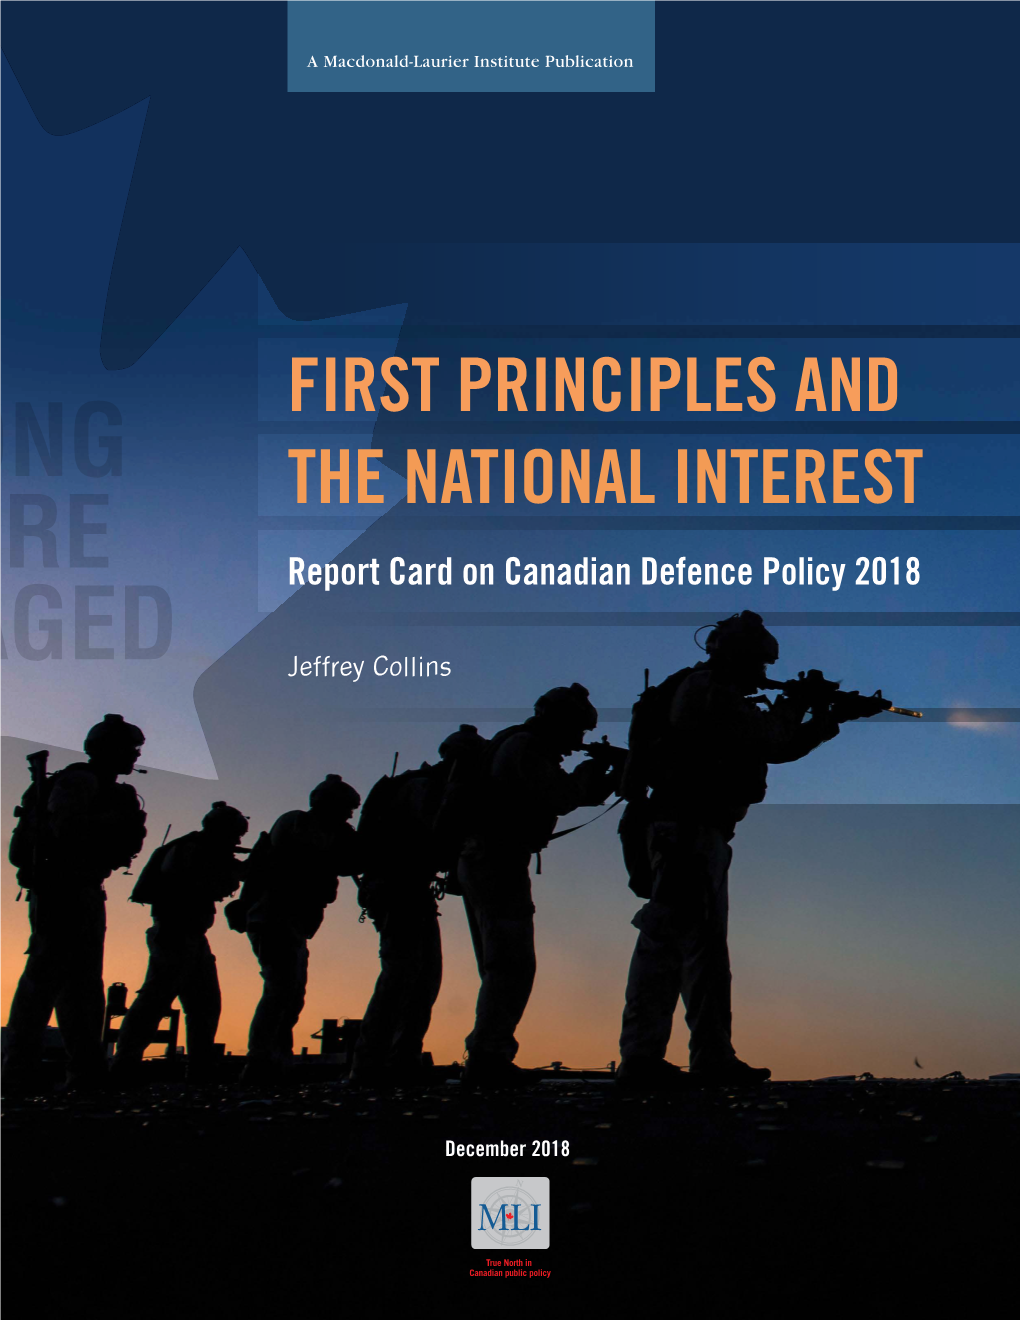 First Principles and the National Interest: Report Card on Canadian Defence Policy 2018